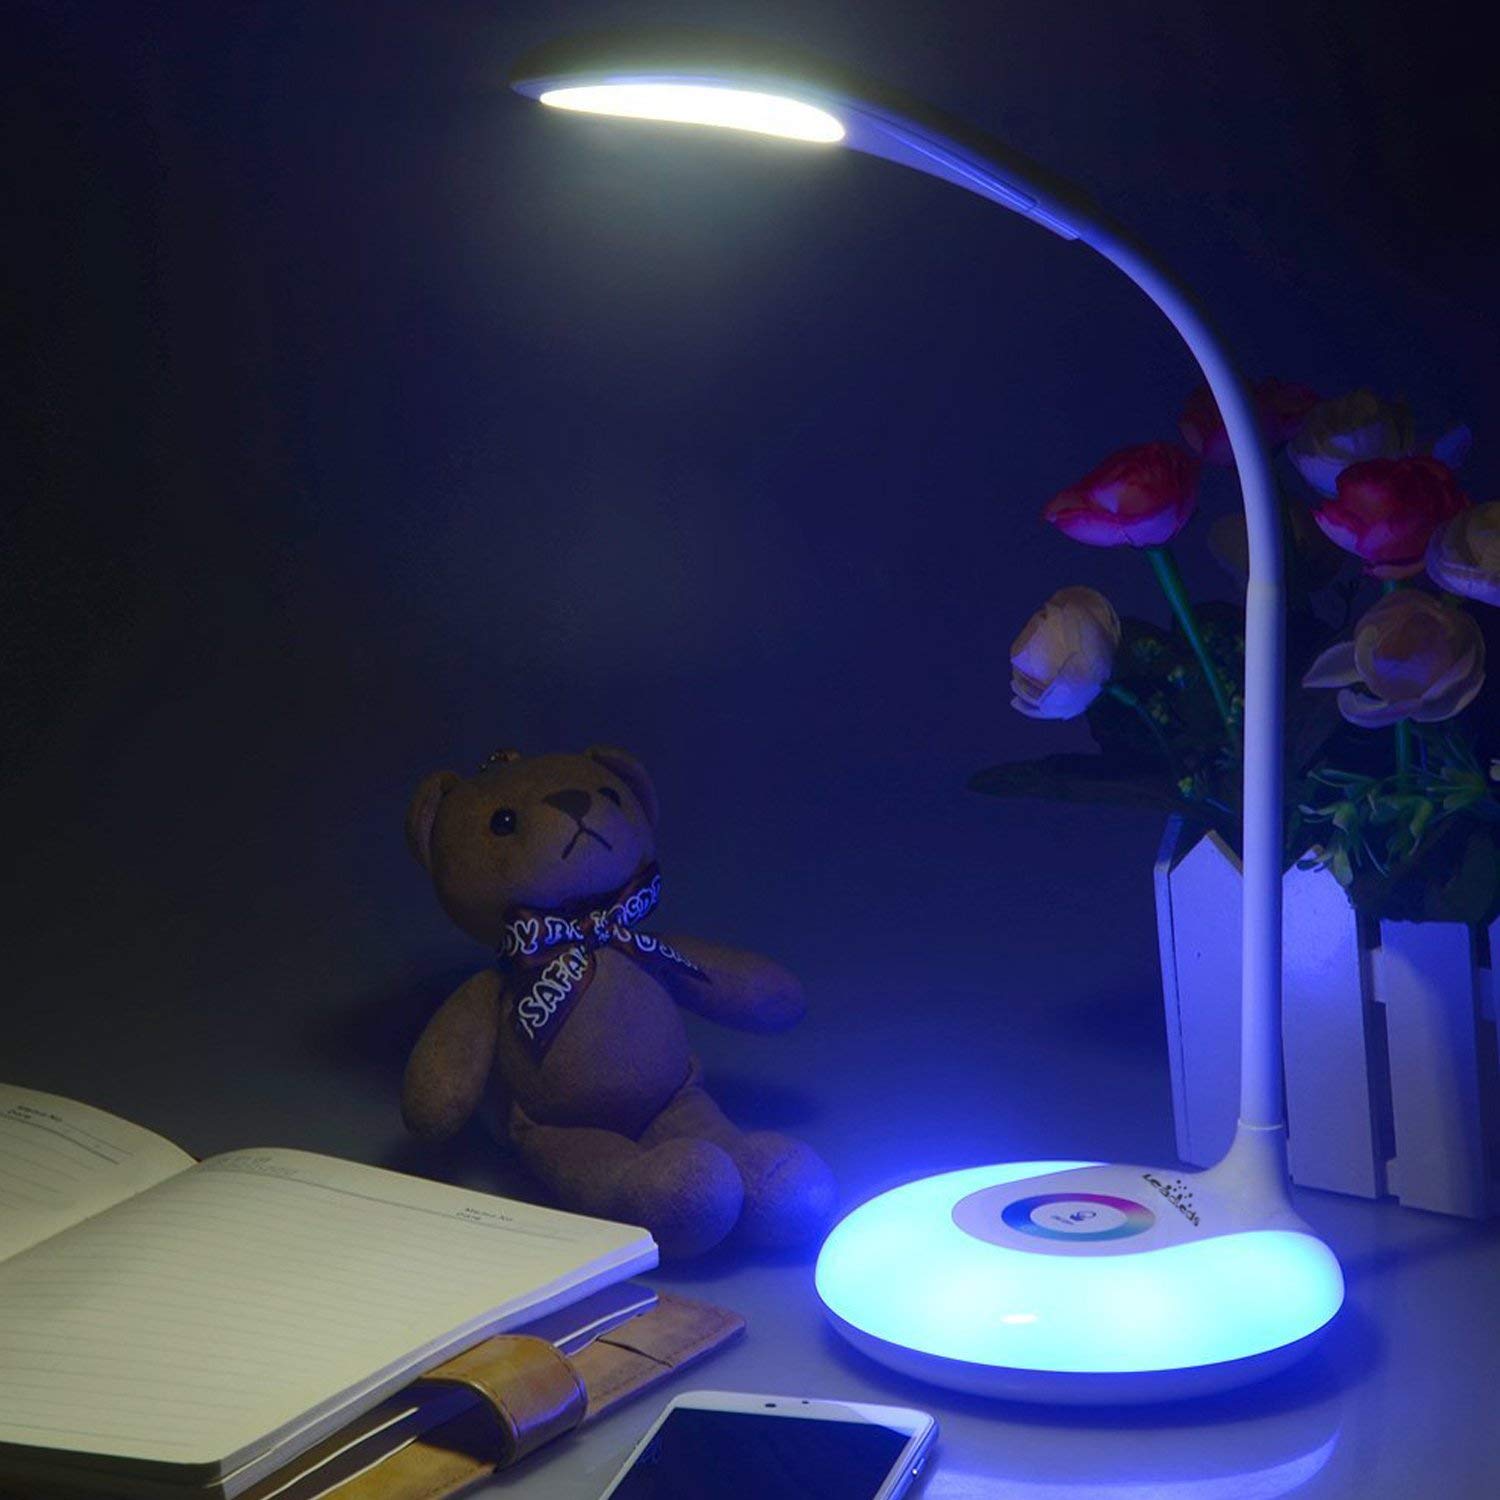 Leadleds Desk Lamps Book Reading Lights with Touch-Sensitive Control Panel, 256 Color Changing Base, USB Rechargeable LED Bedside Lamps Night Light - Leadleds